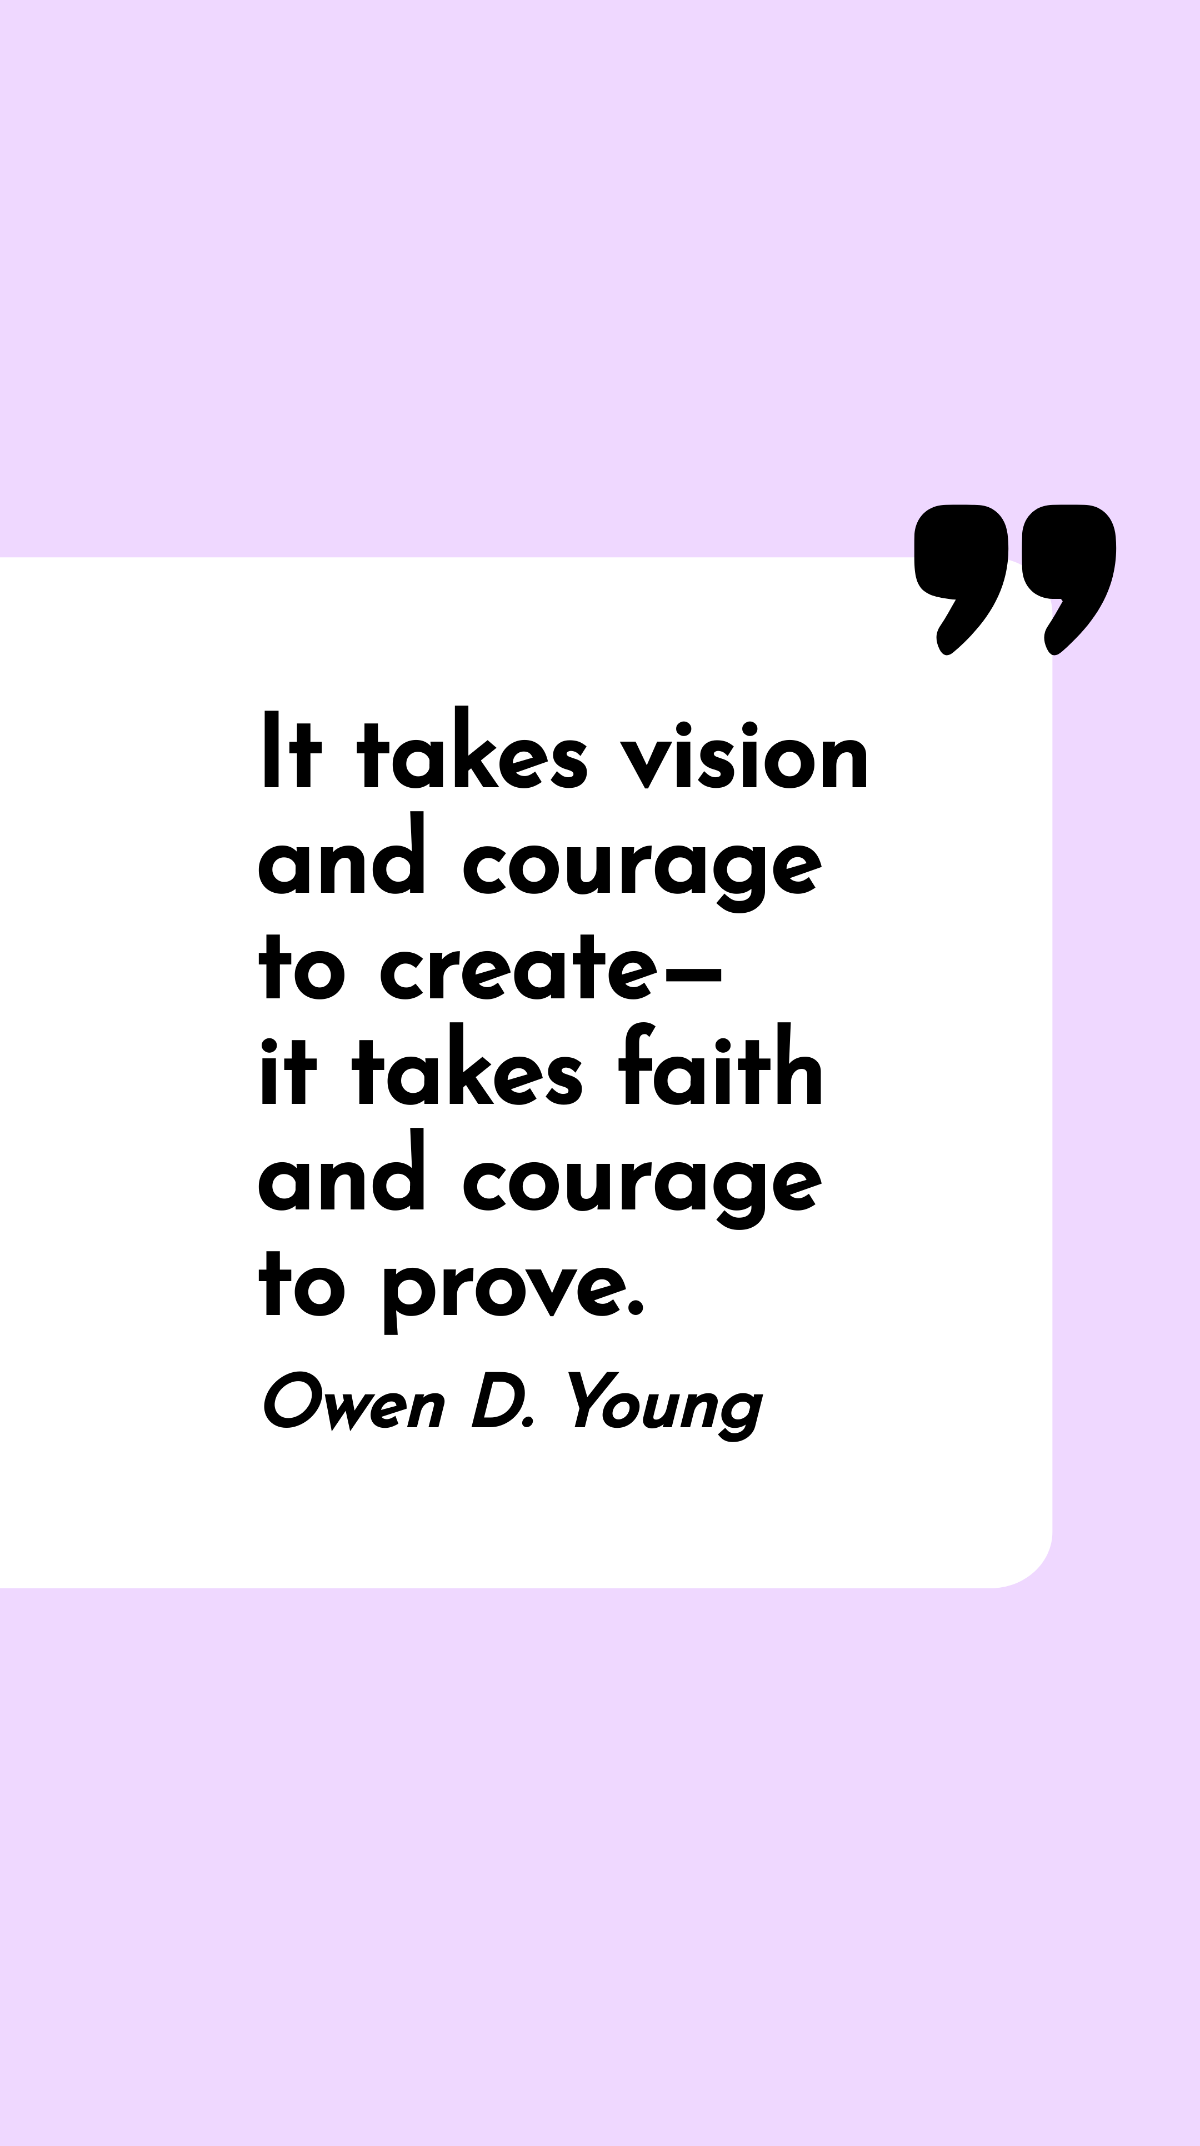 Owen D. Young - It takes vision and courage to create - it takes faith and courage to prove. Template